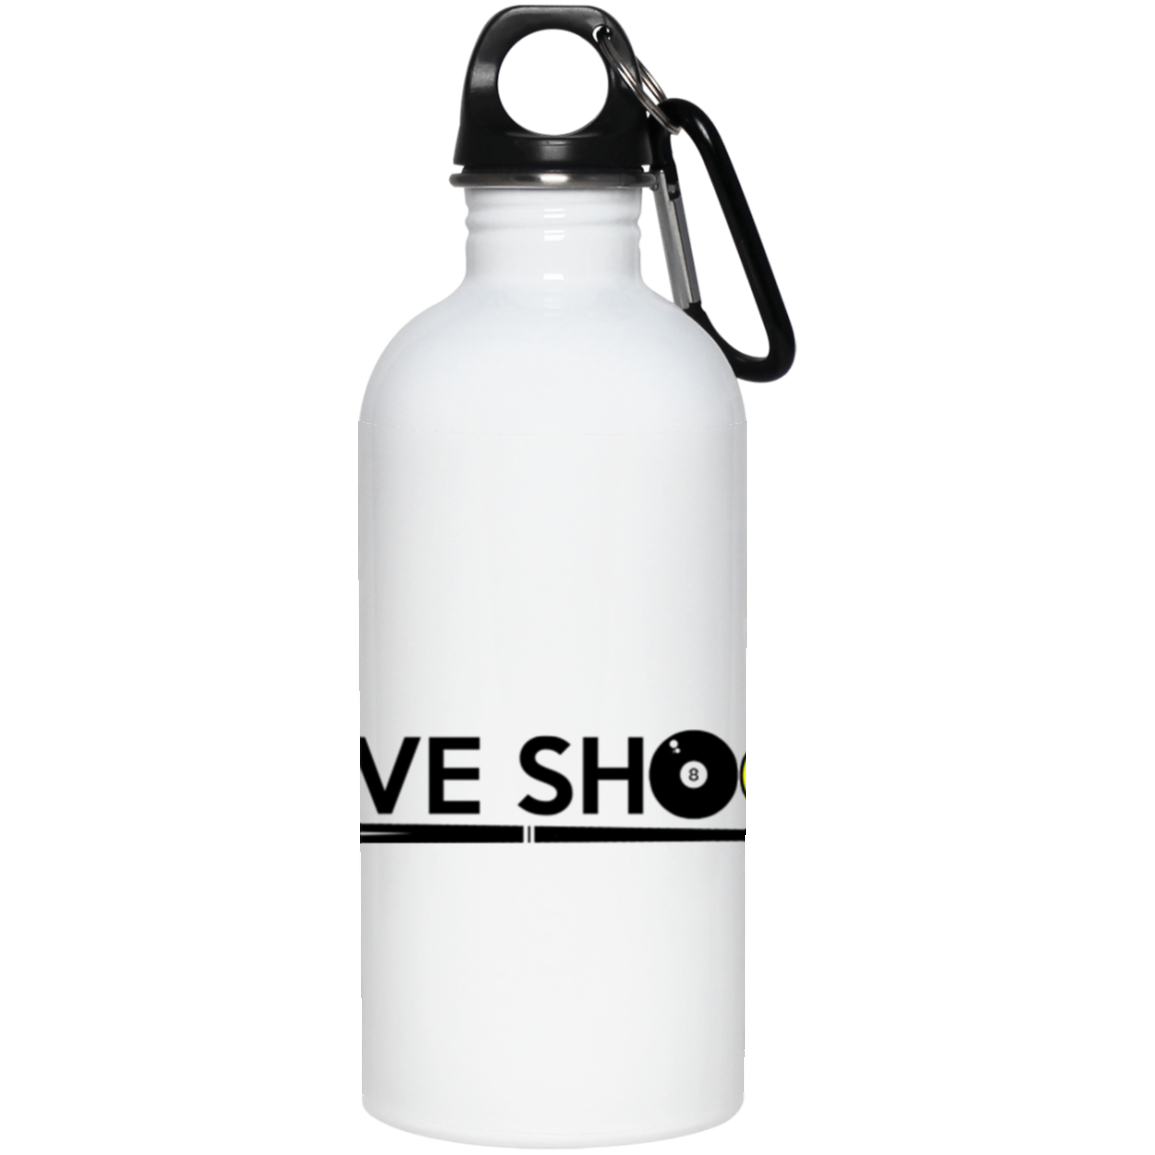 The GHOATS Custom Design #1. Active Shooter. 20 oz. Stainless Steel Water Bottle